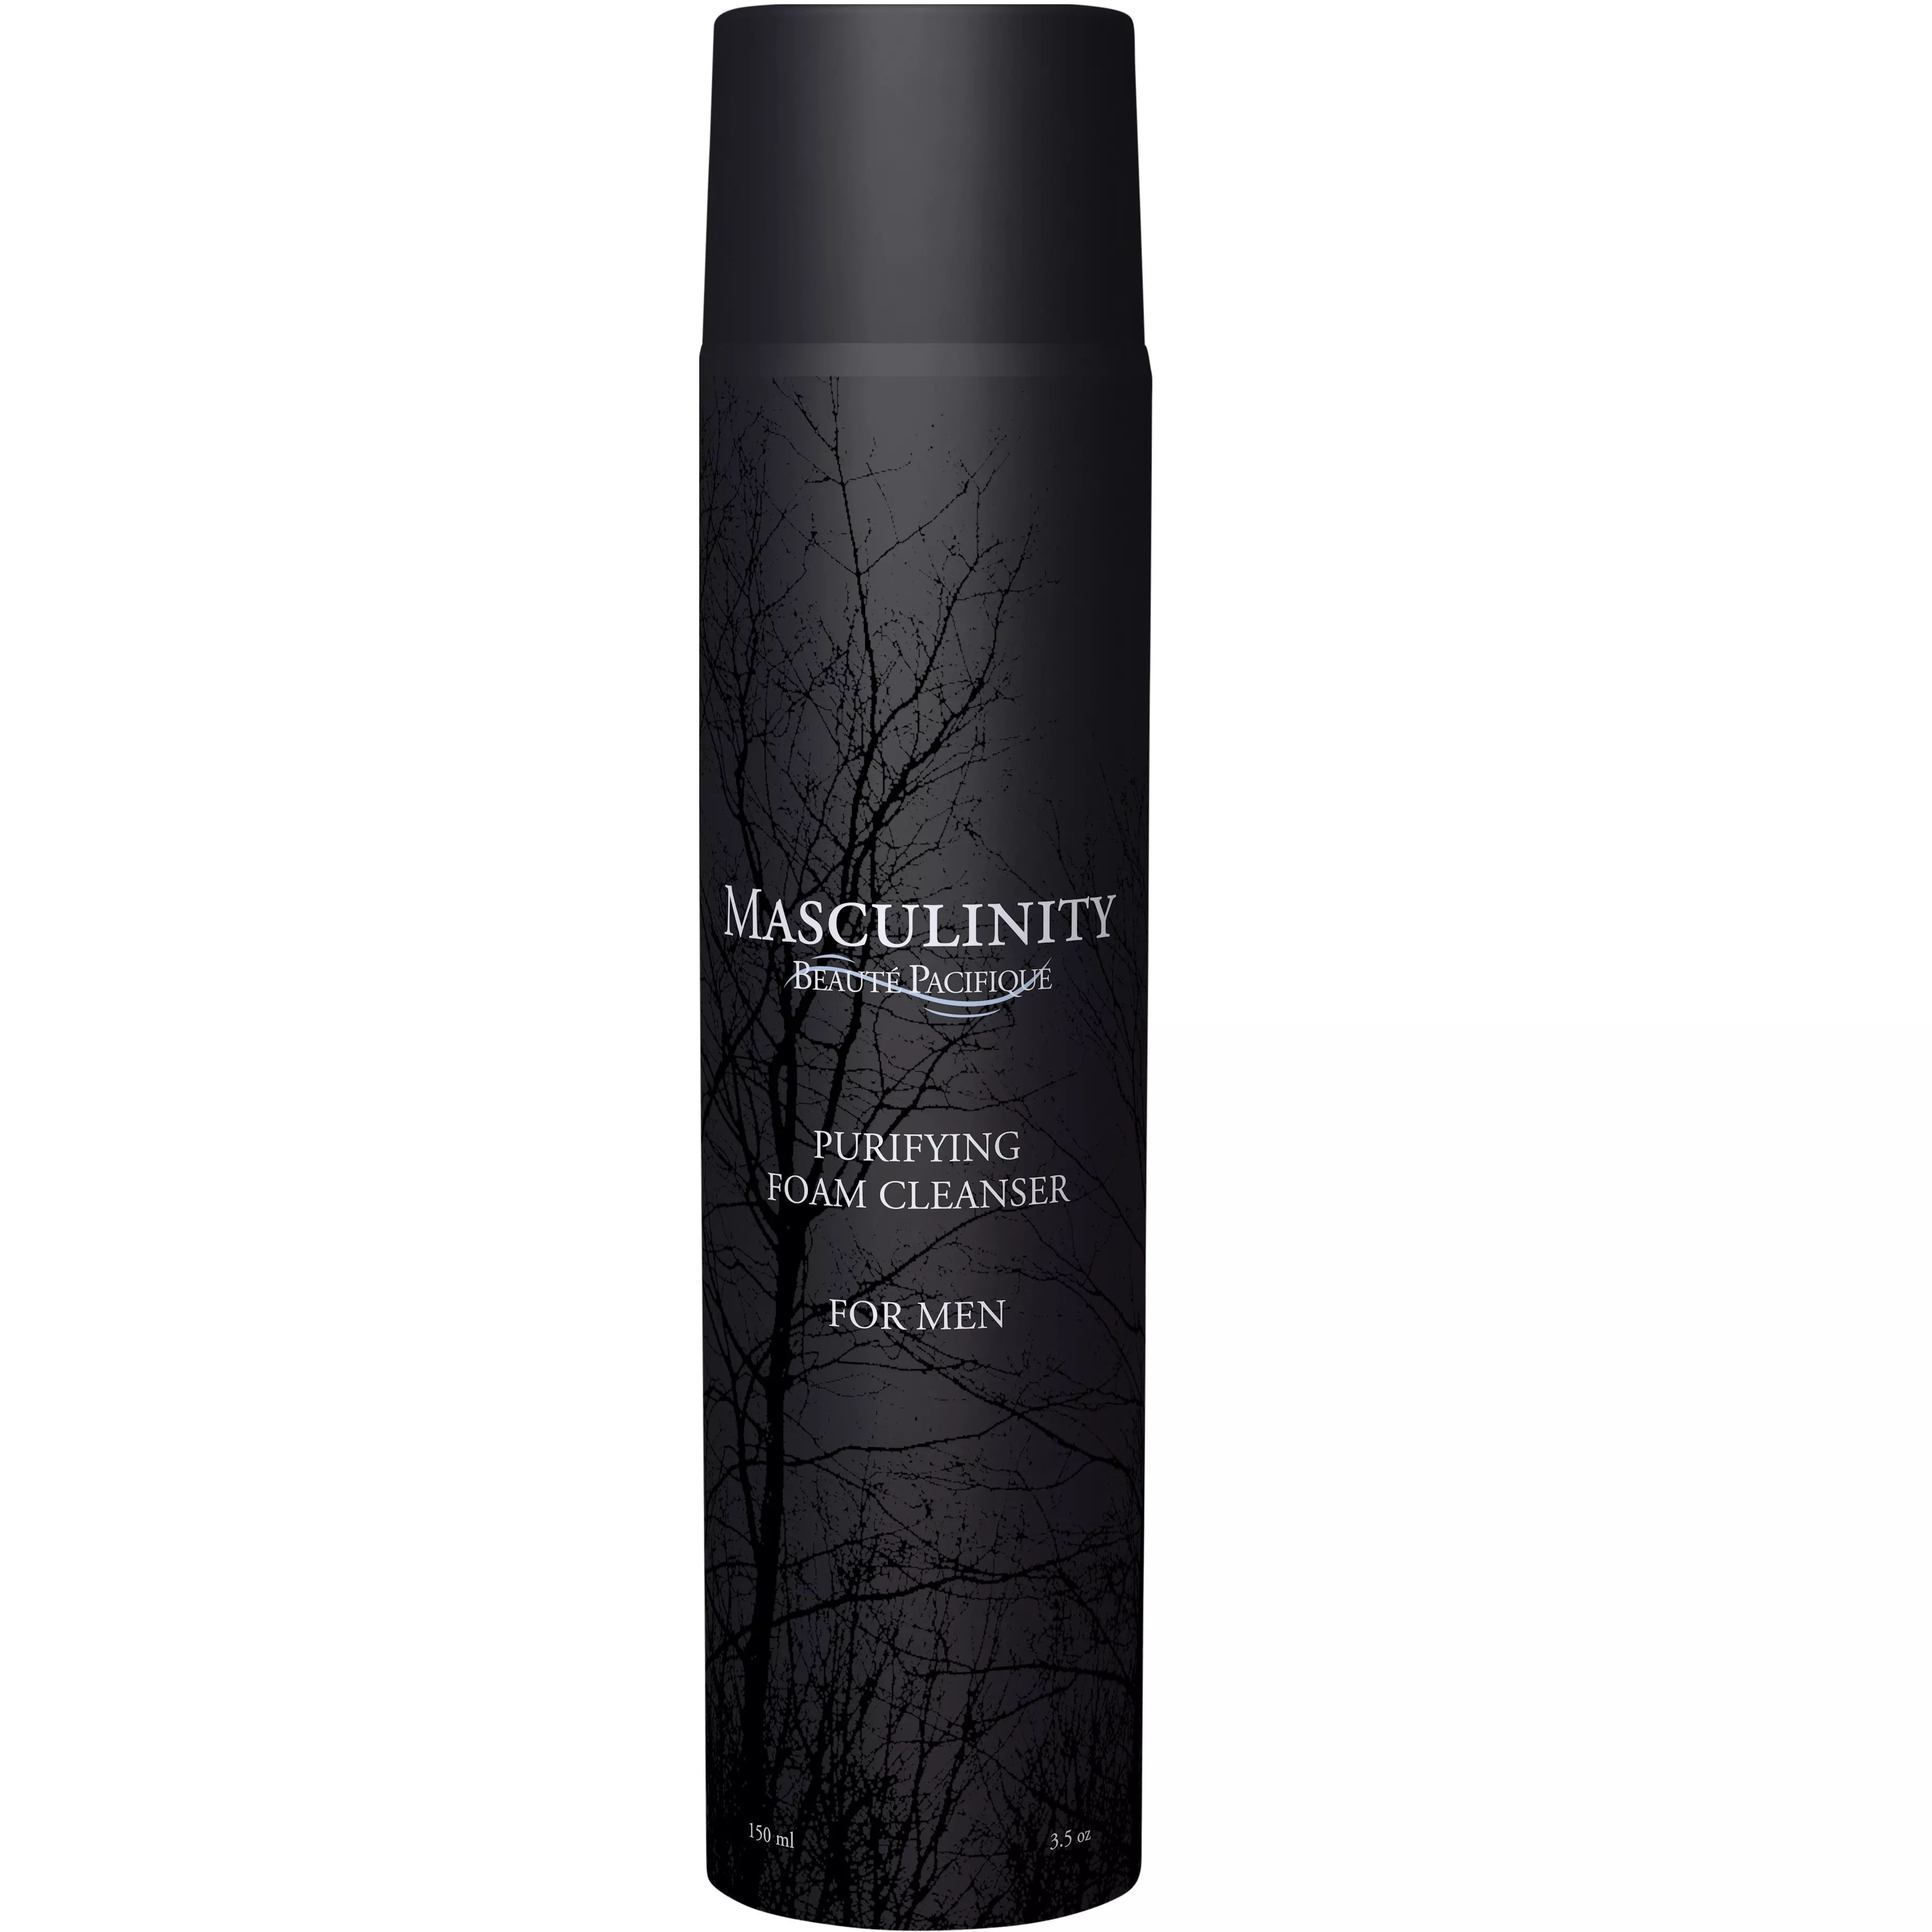 Beaute Pacifique Masculinity Purifying Foam Cleanser